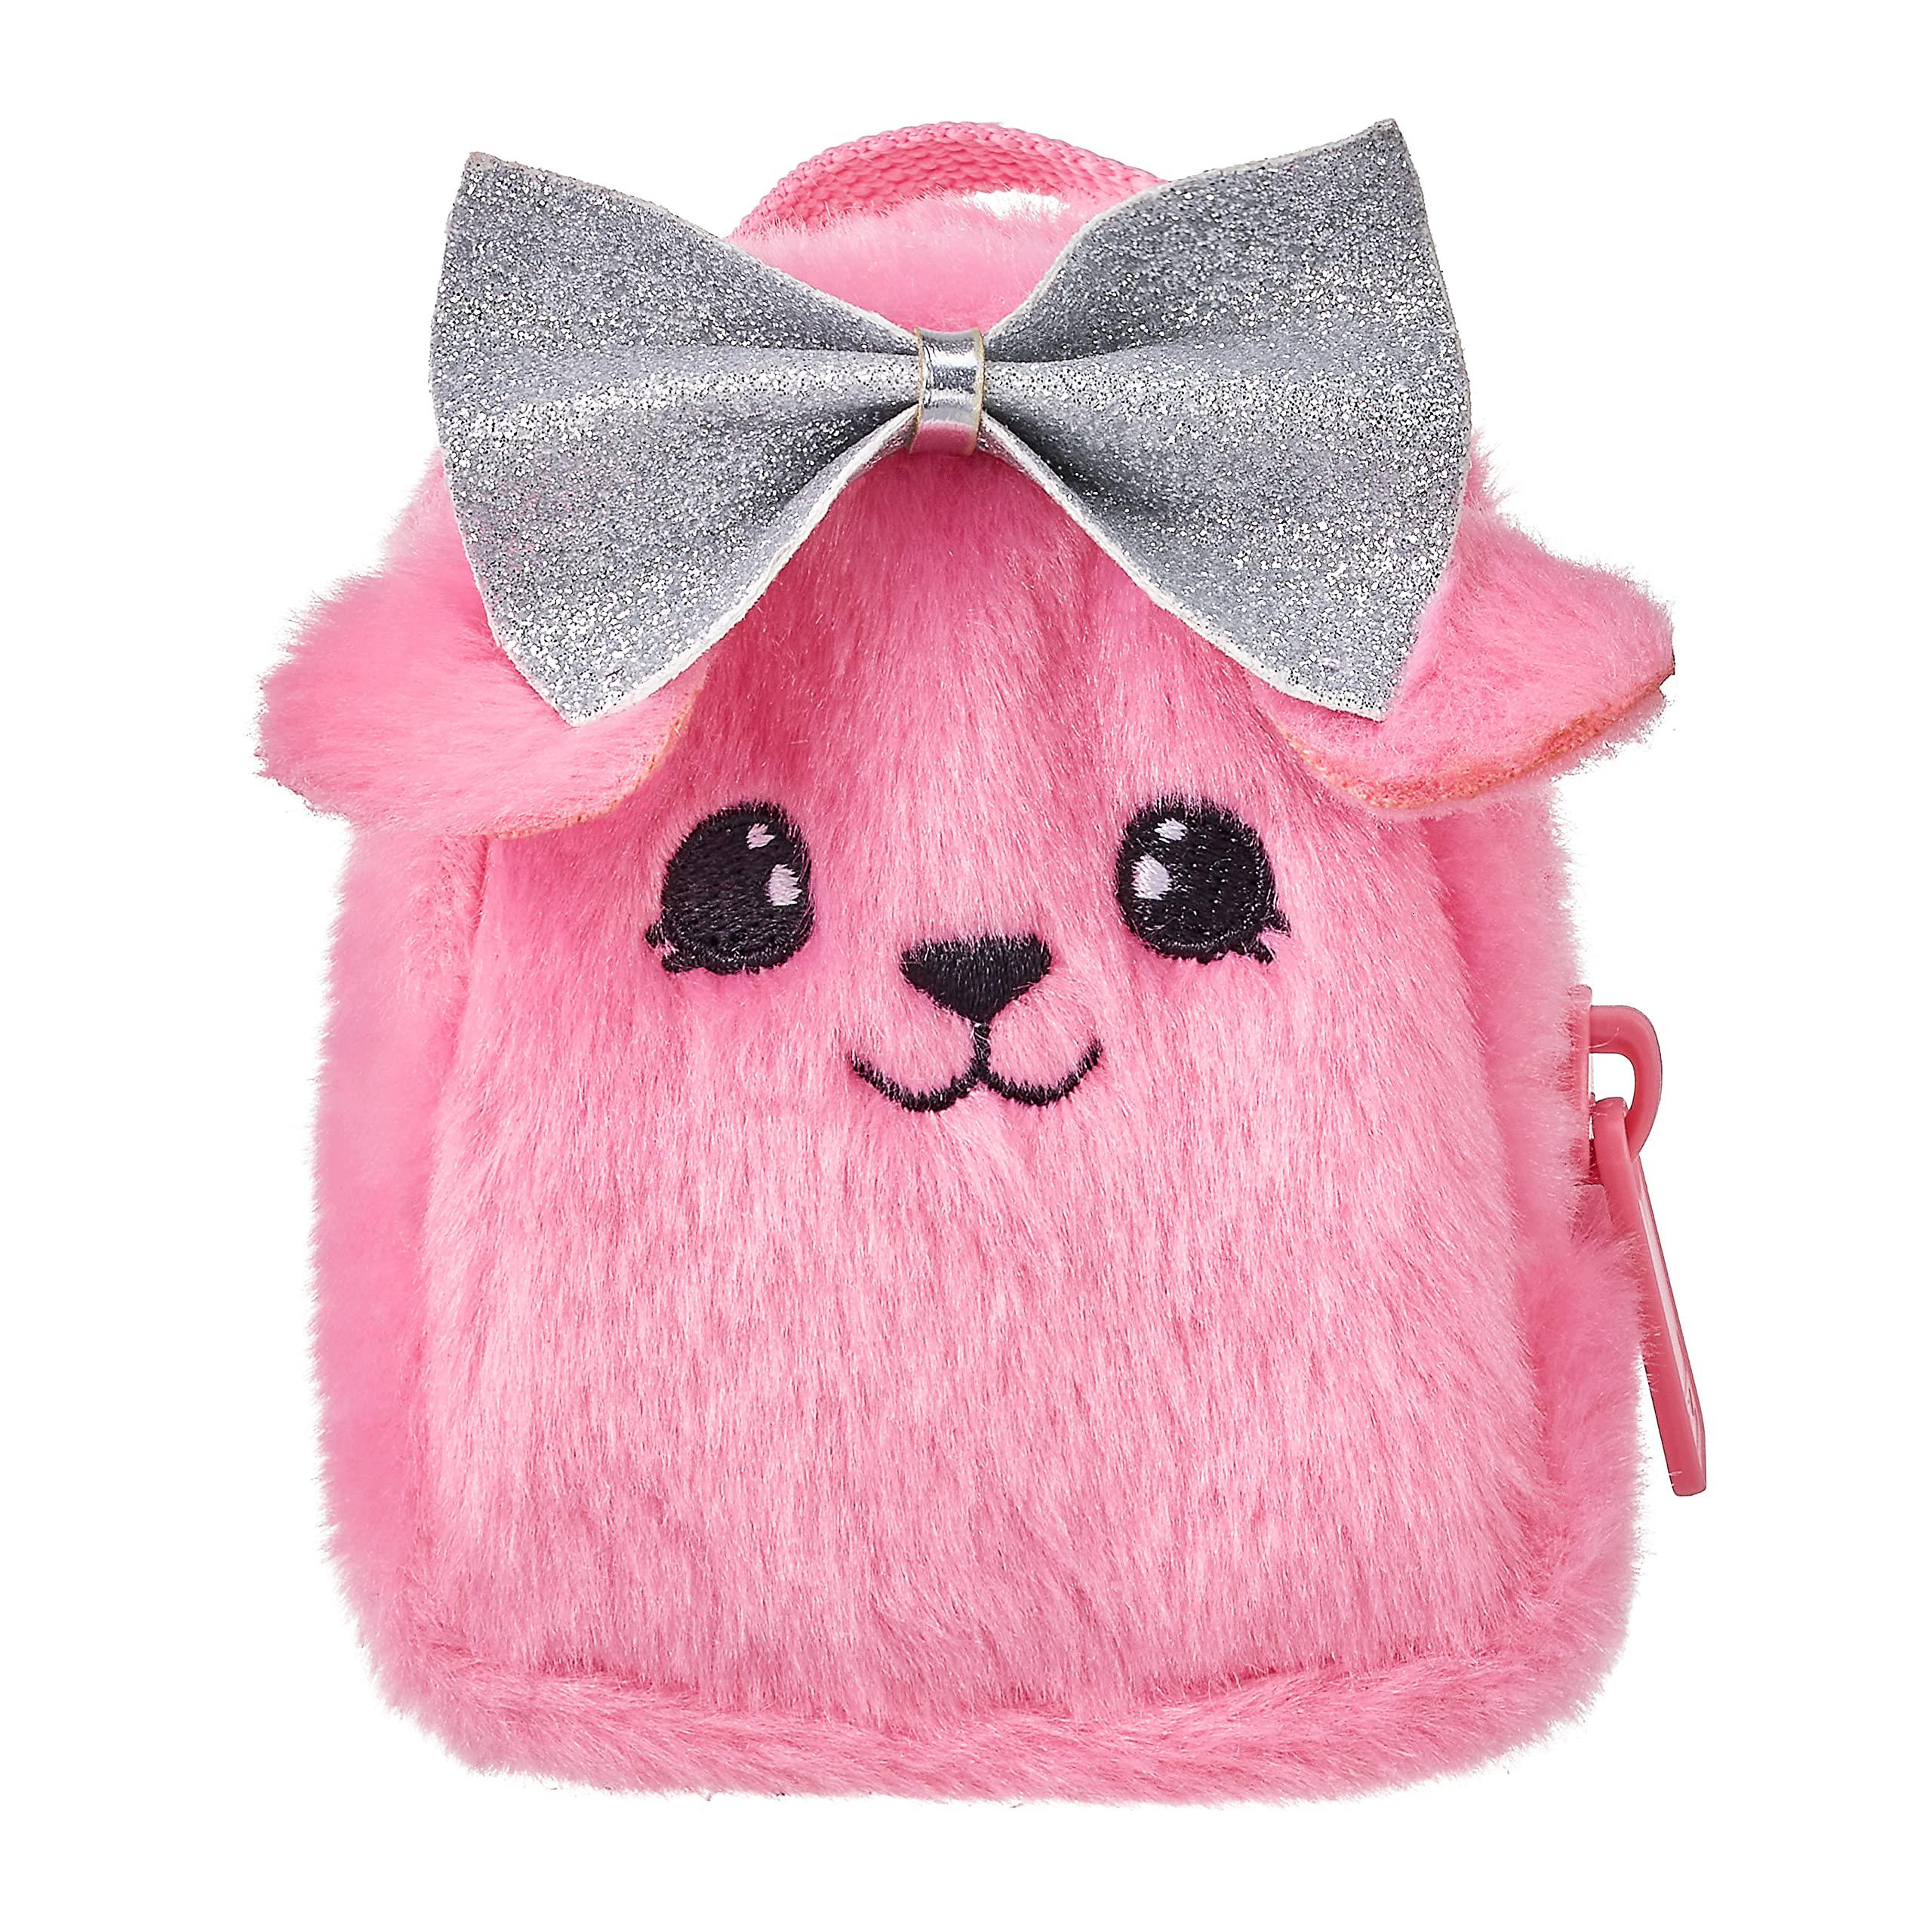 real littles - collectible micro backpack with 4 micro working surprises inside! styles may vary